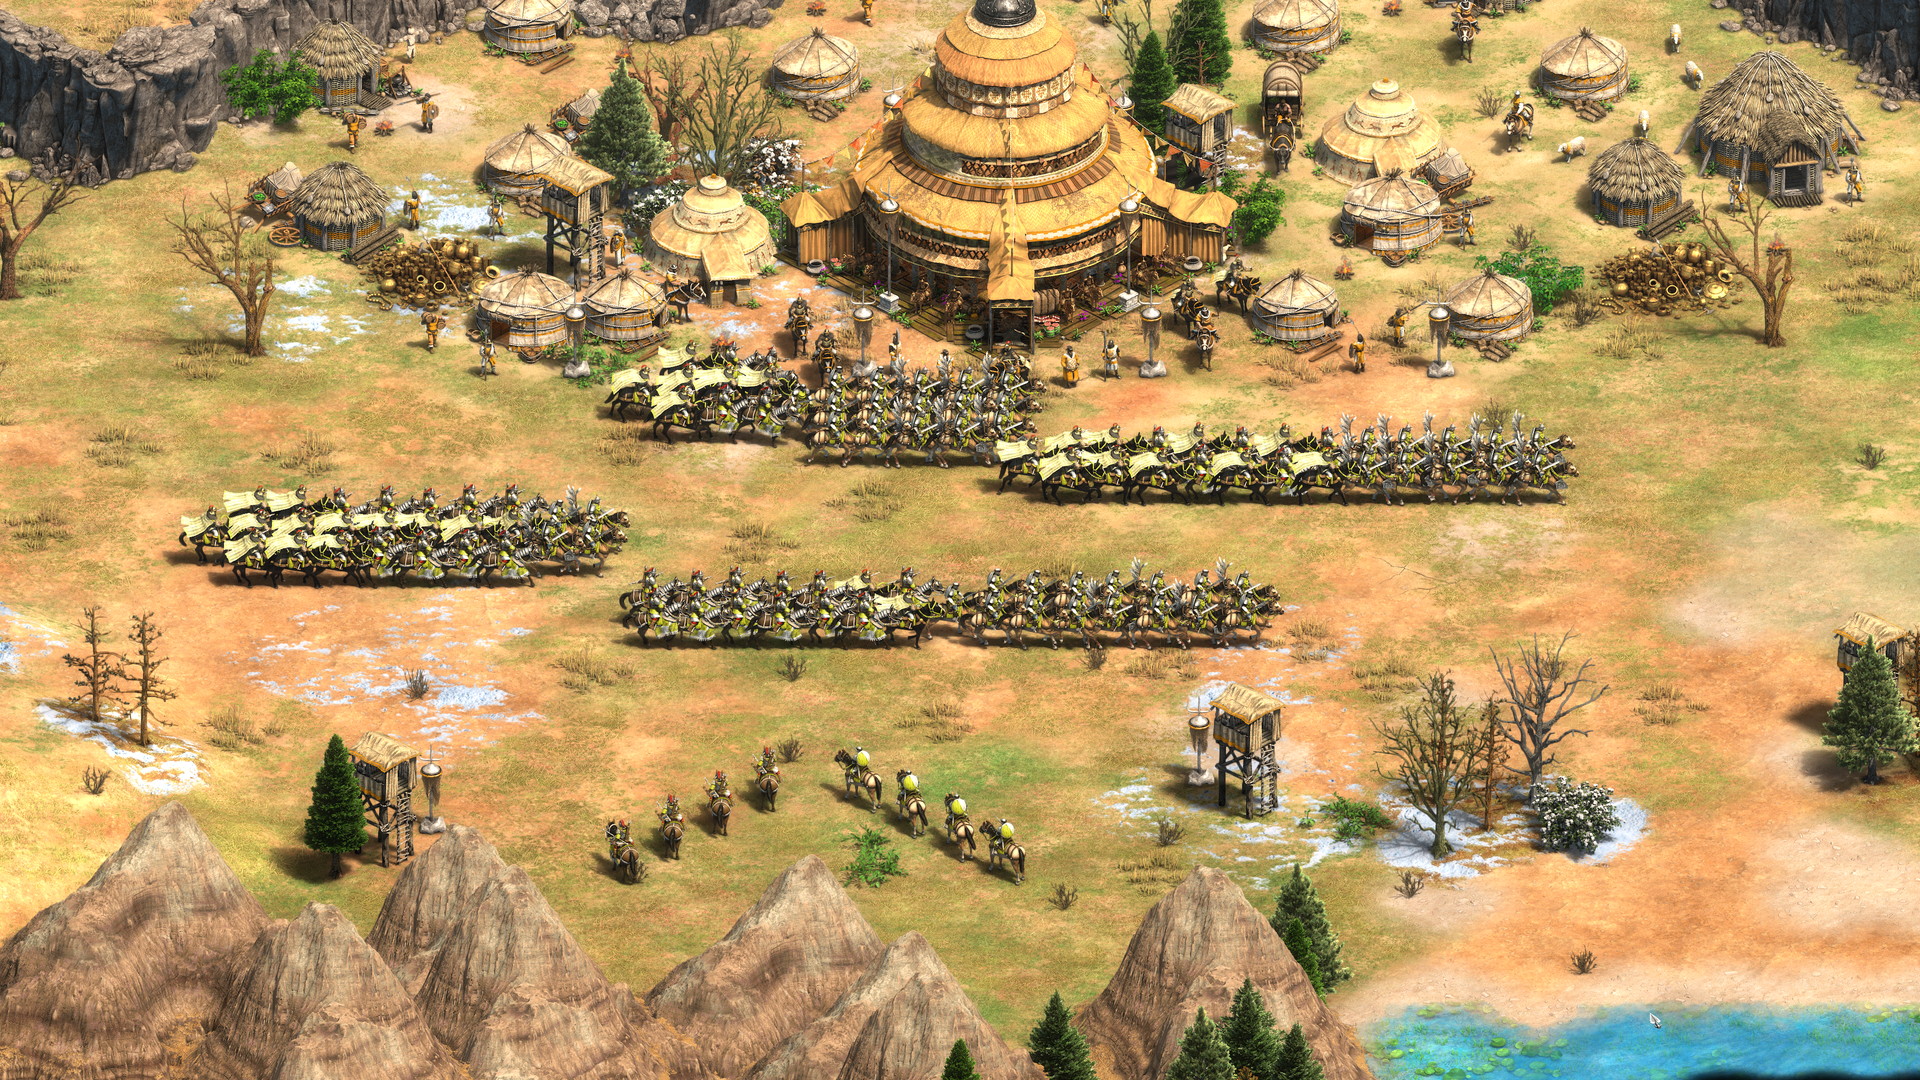 Age of Empires II: Definitive Edition - screenshot 4